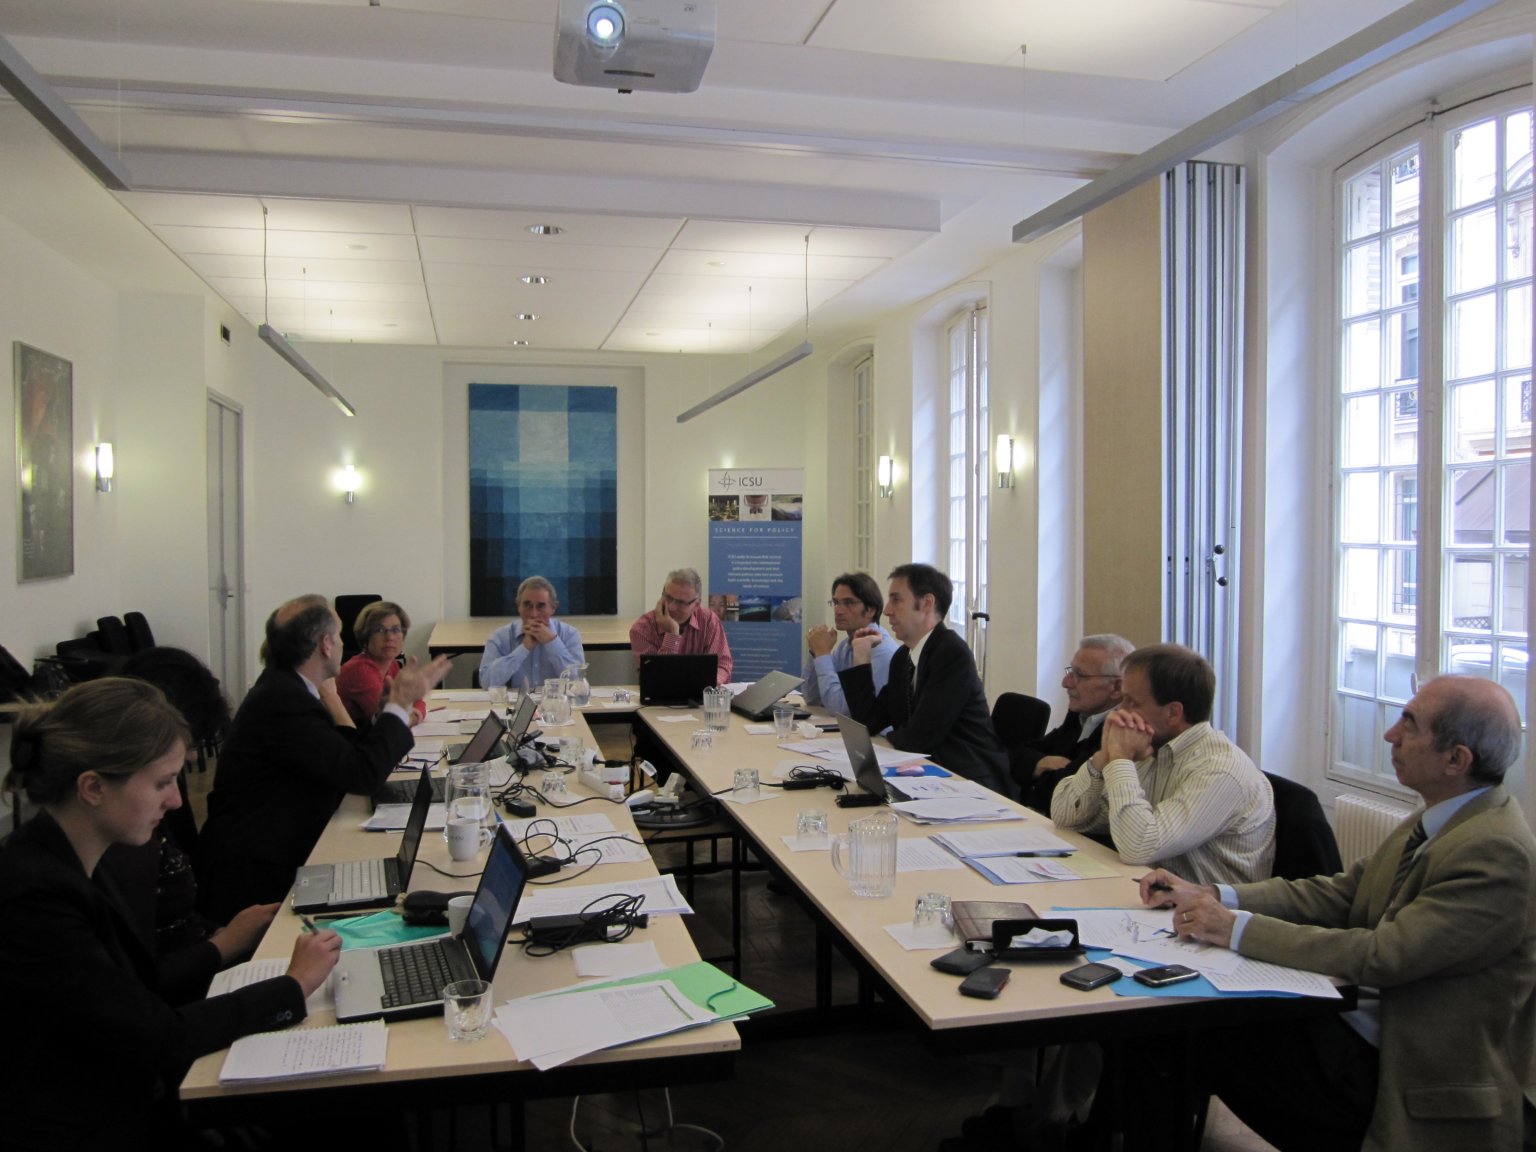 Future Earth: Transition Team group met to discuss institutional design options